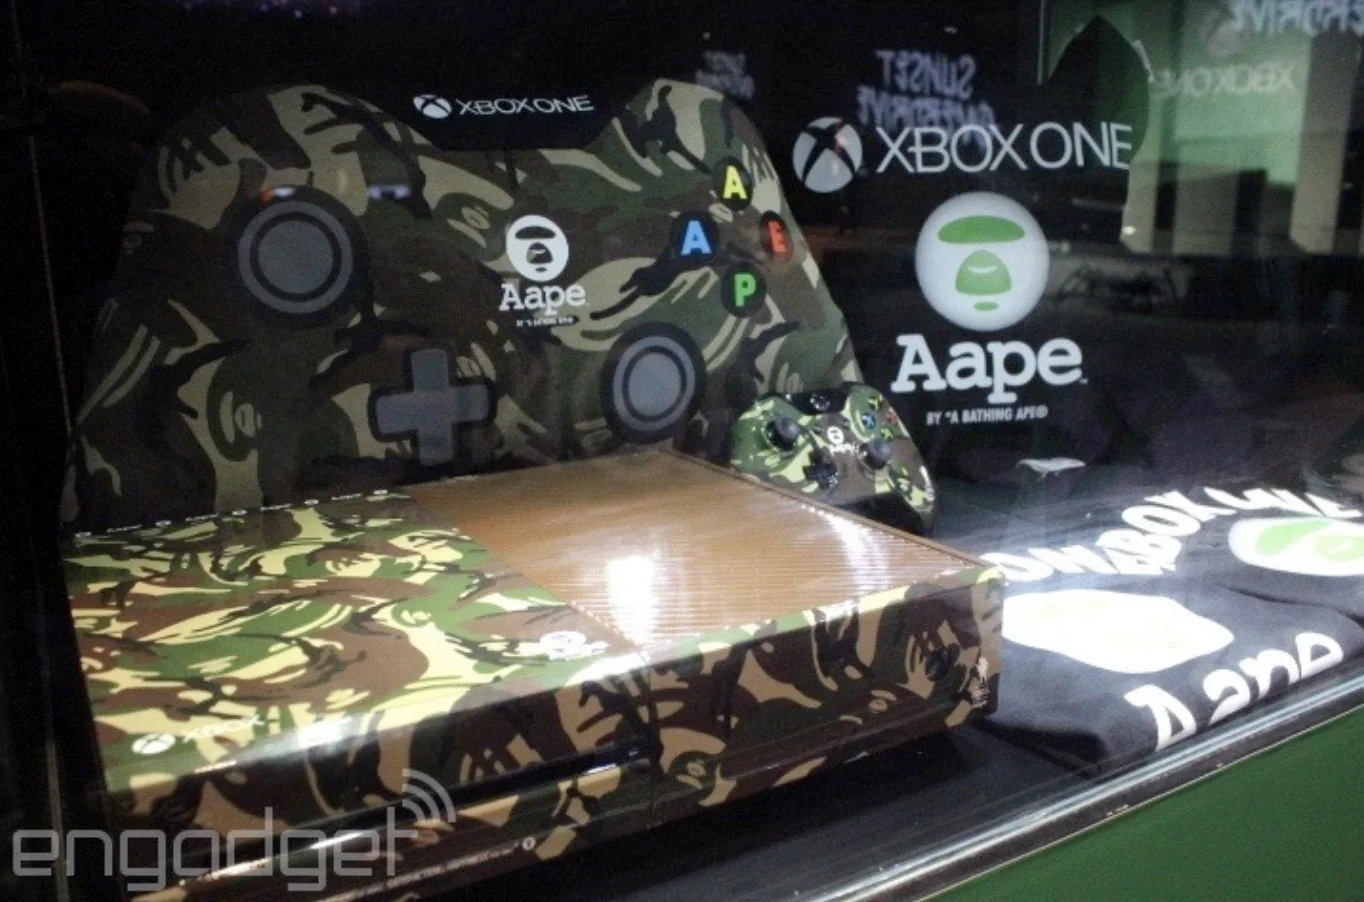 The Camouflage Xbox One from Aape!